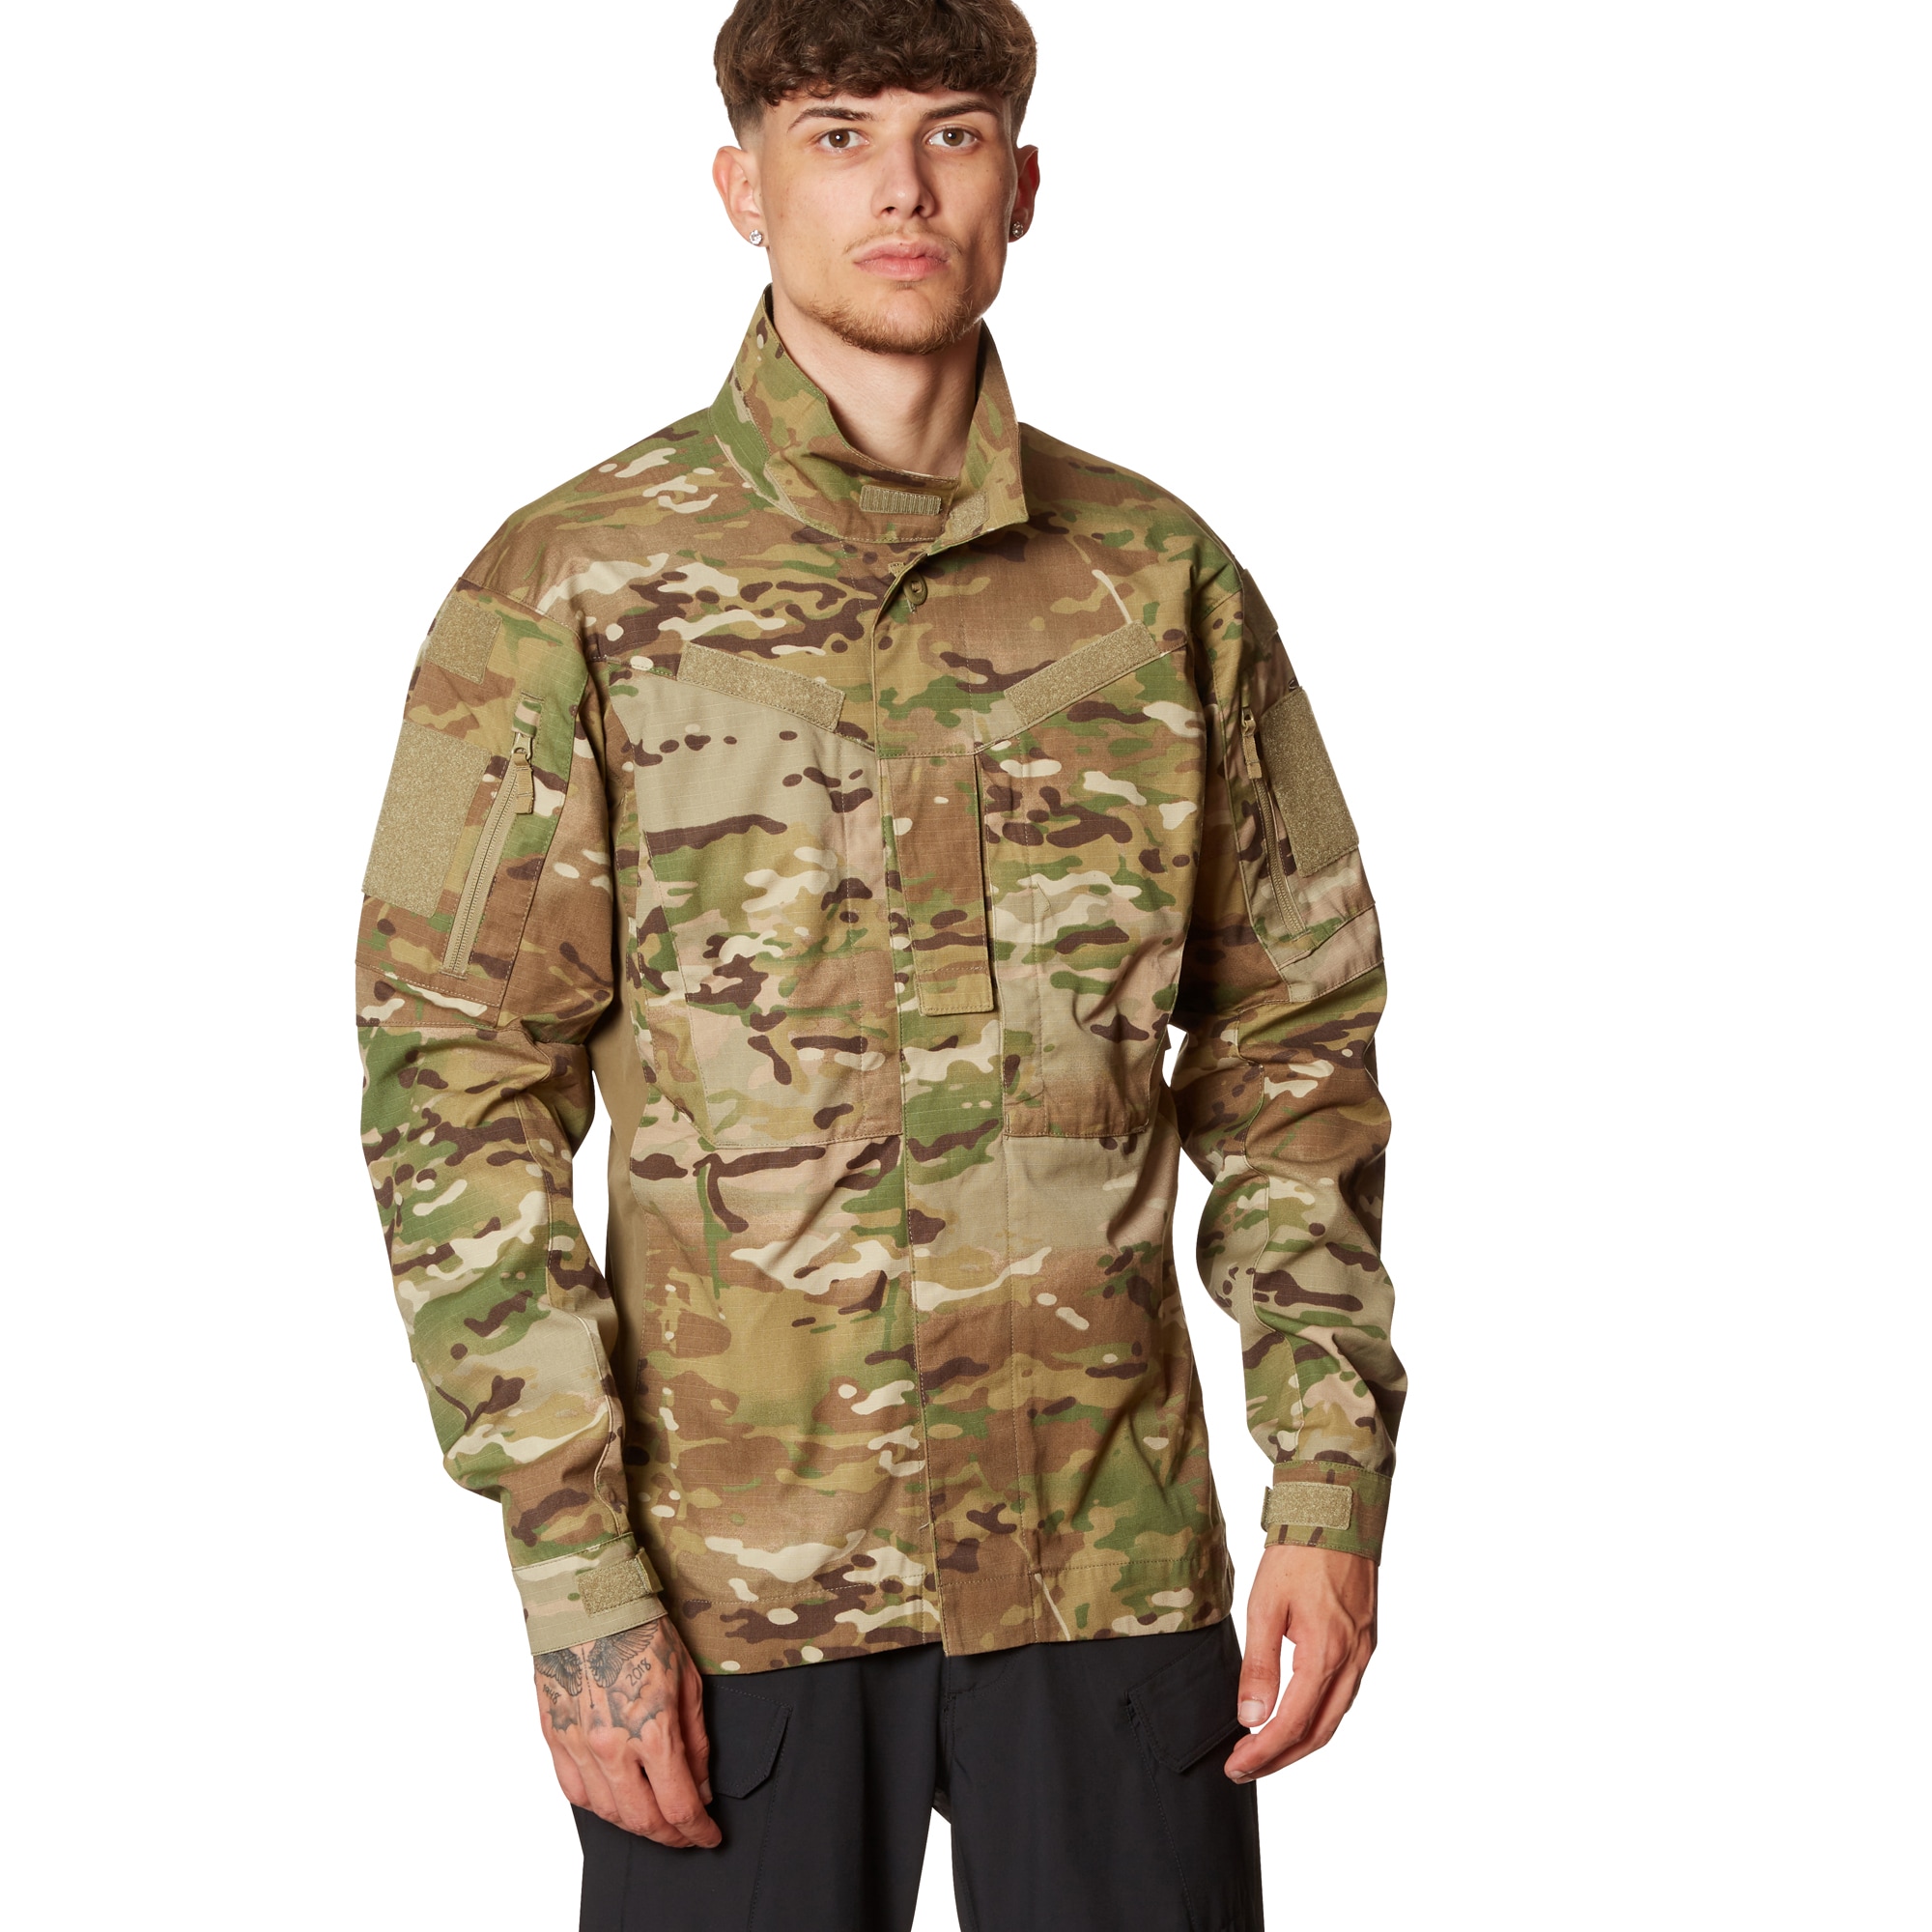 Purchase the Helikon-Tex Field Blouse MBDU multicam by ASMC